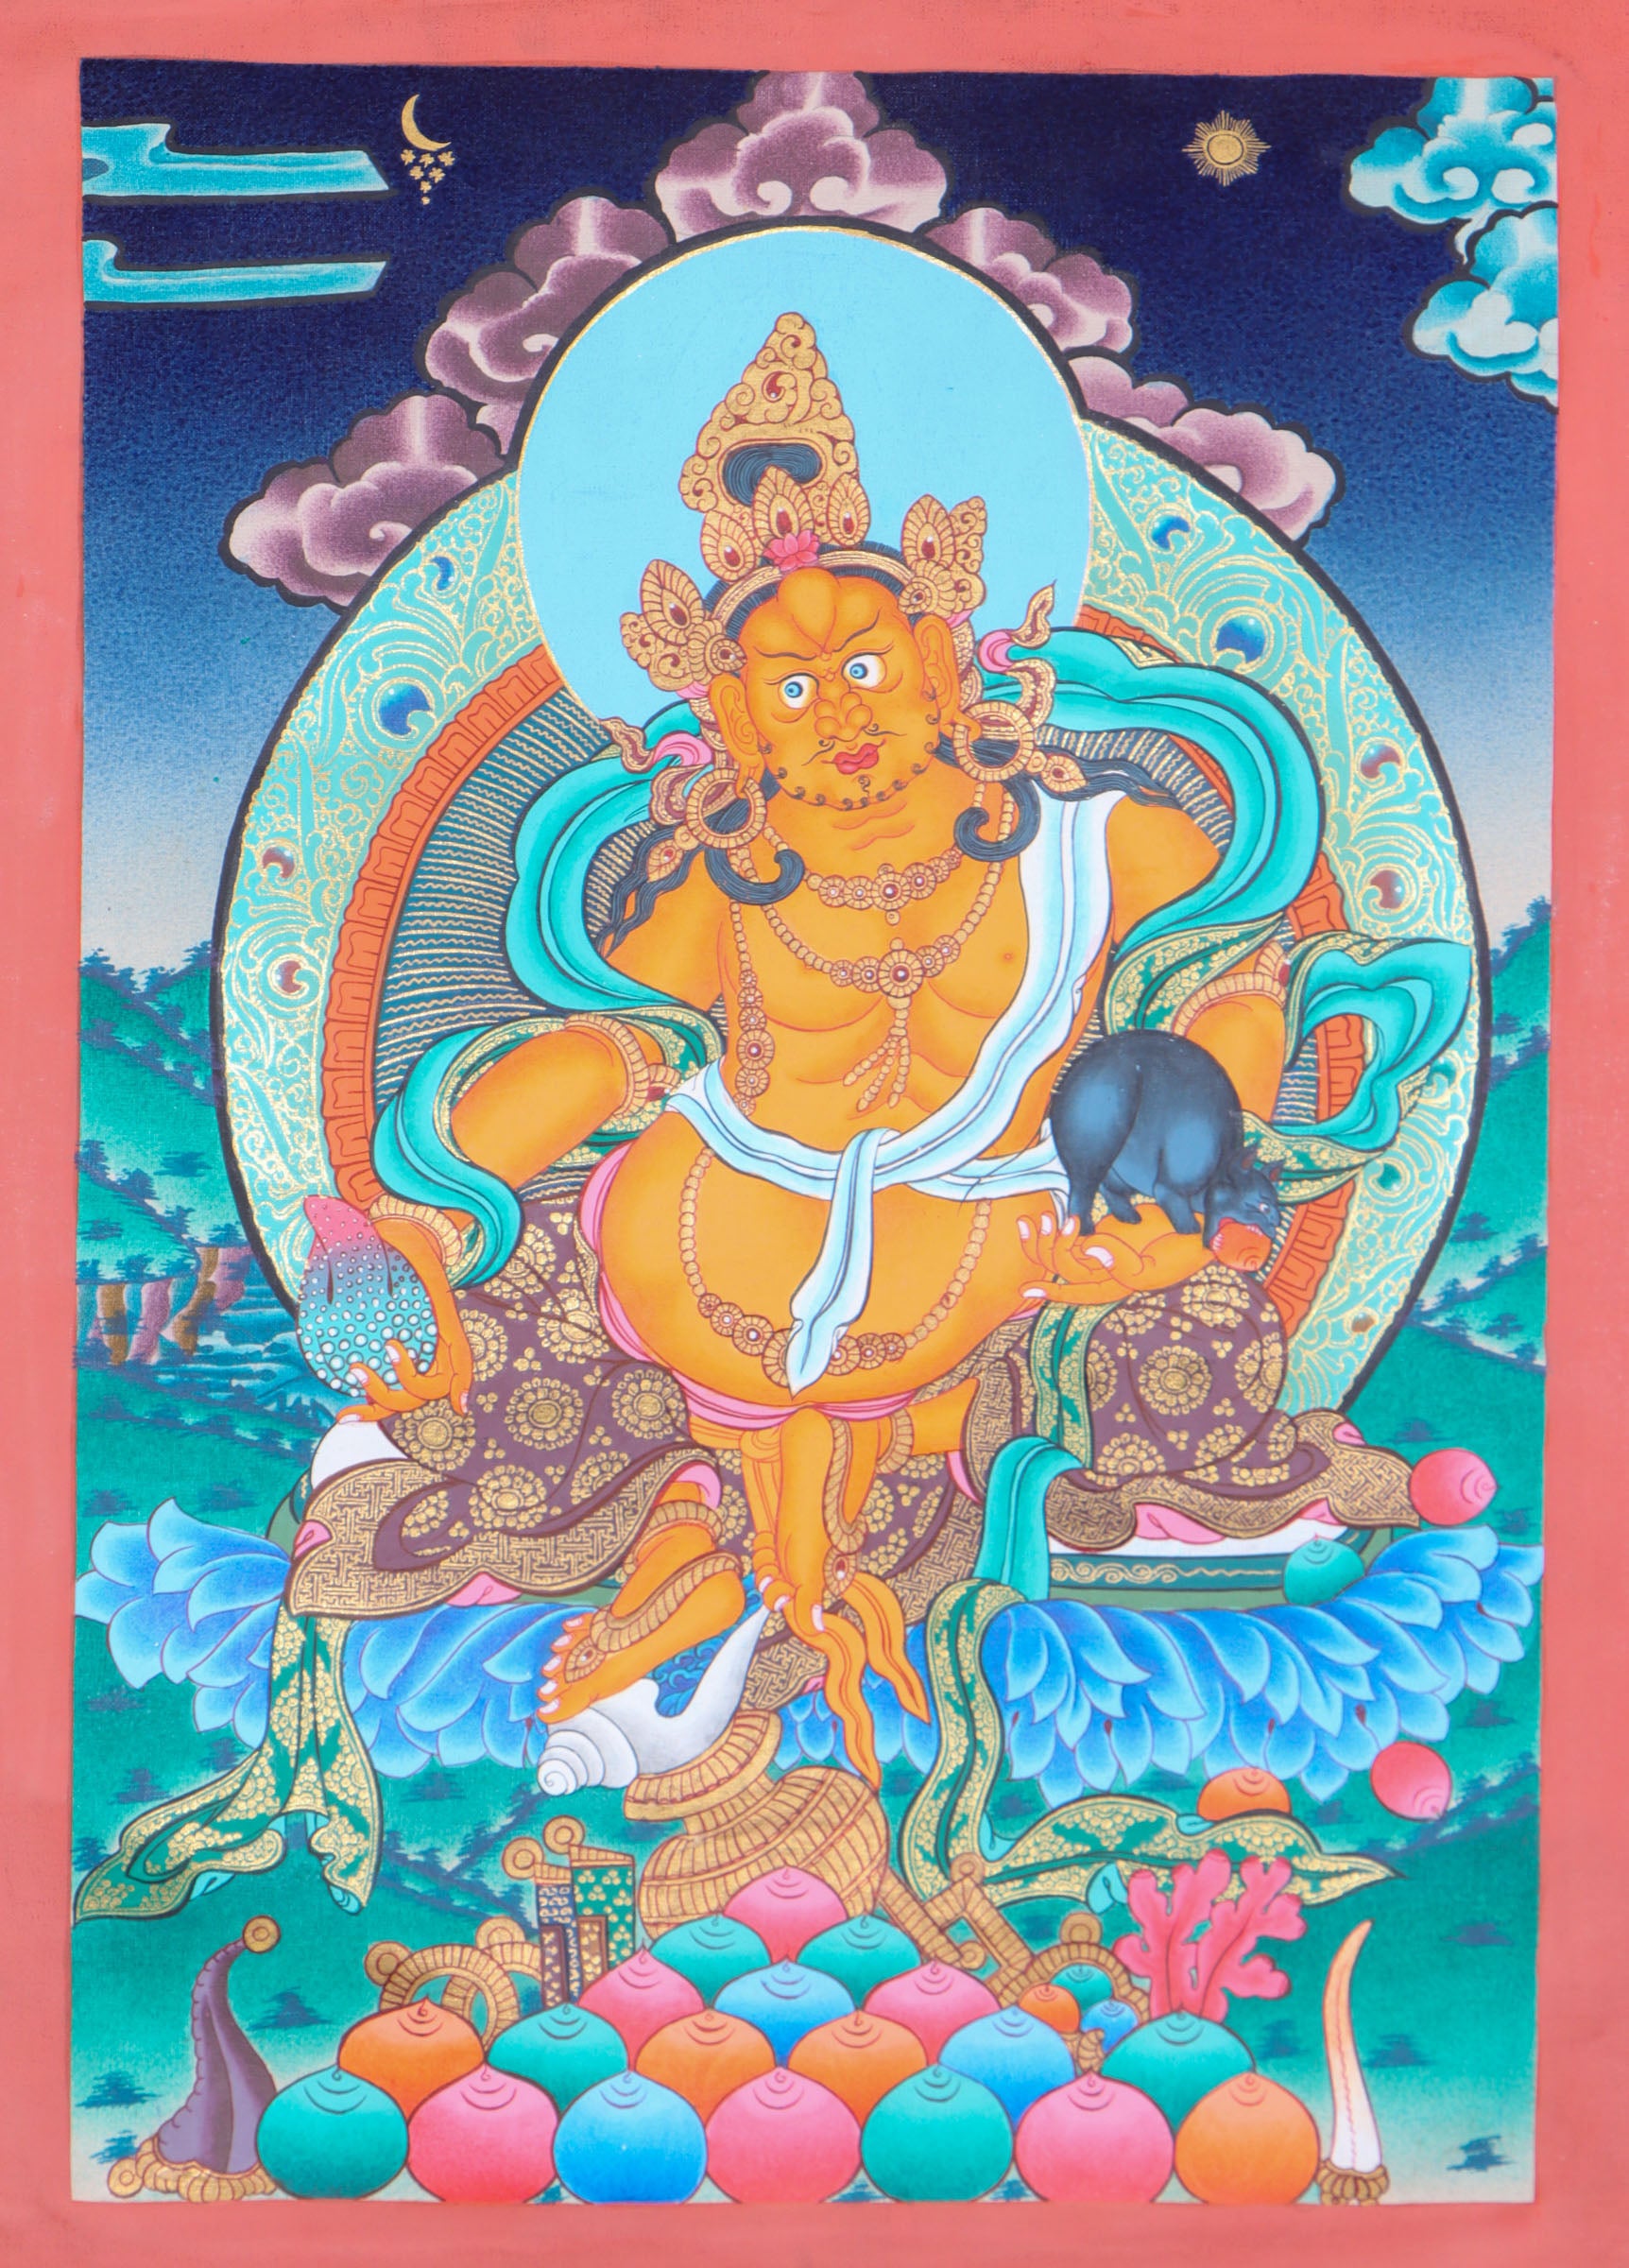 Jambhala, a wealth deity, helps remove poverty and brings abundance to Dharma practitioners.